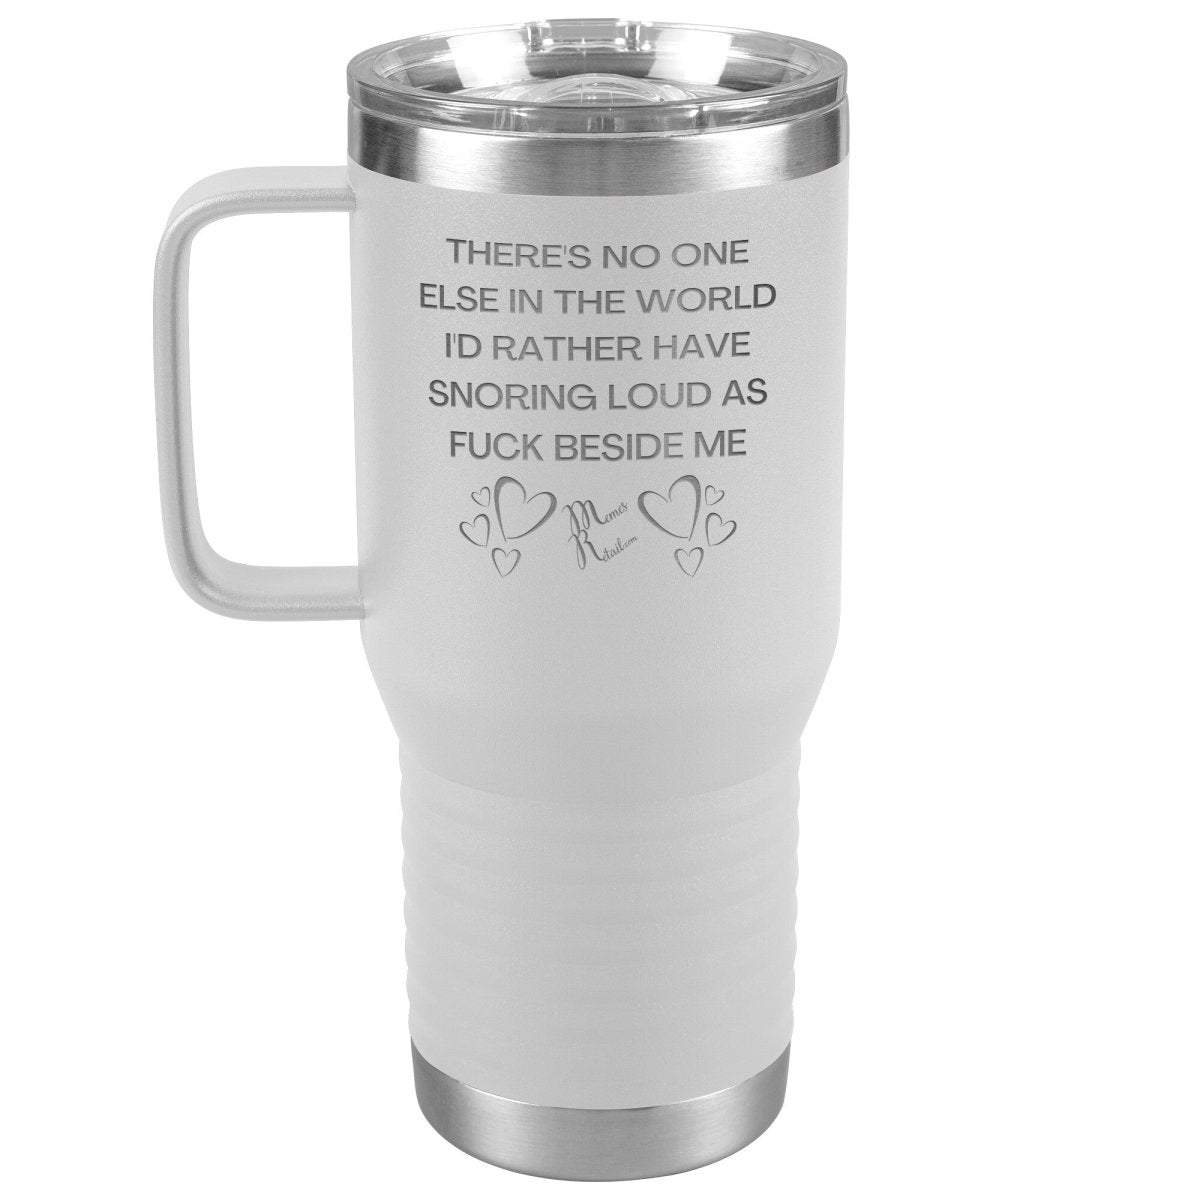 There's No One Else in the World I'd Rather Have Snoring Loud, 20oz Travel Tumbler / White - MemesRetail.com